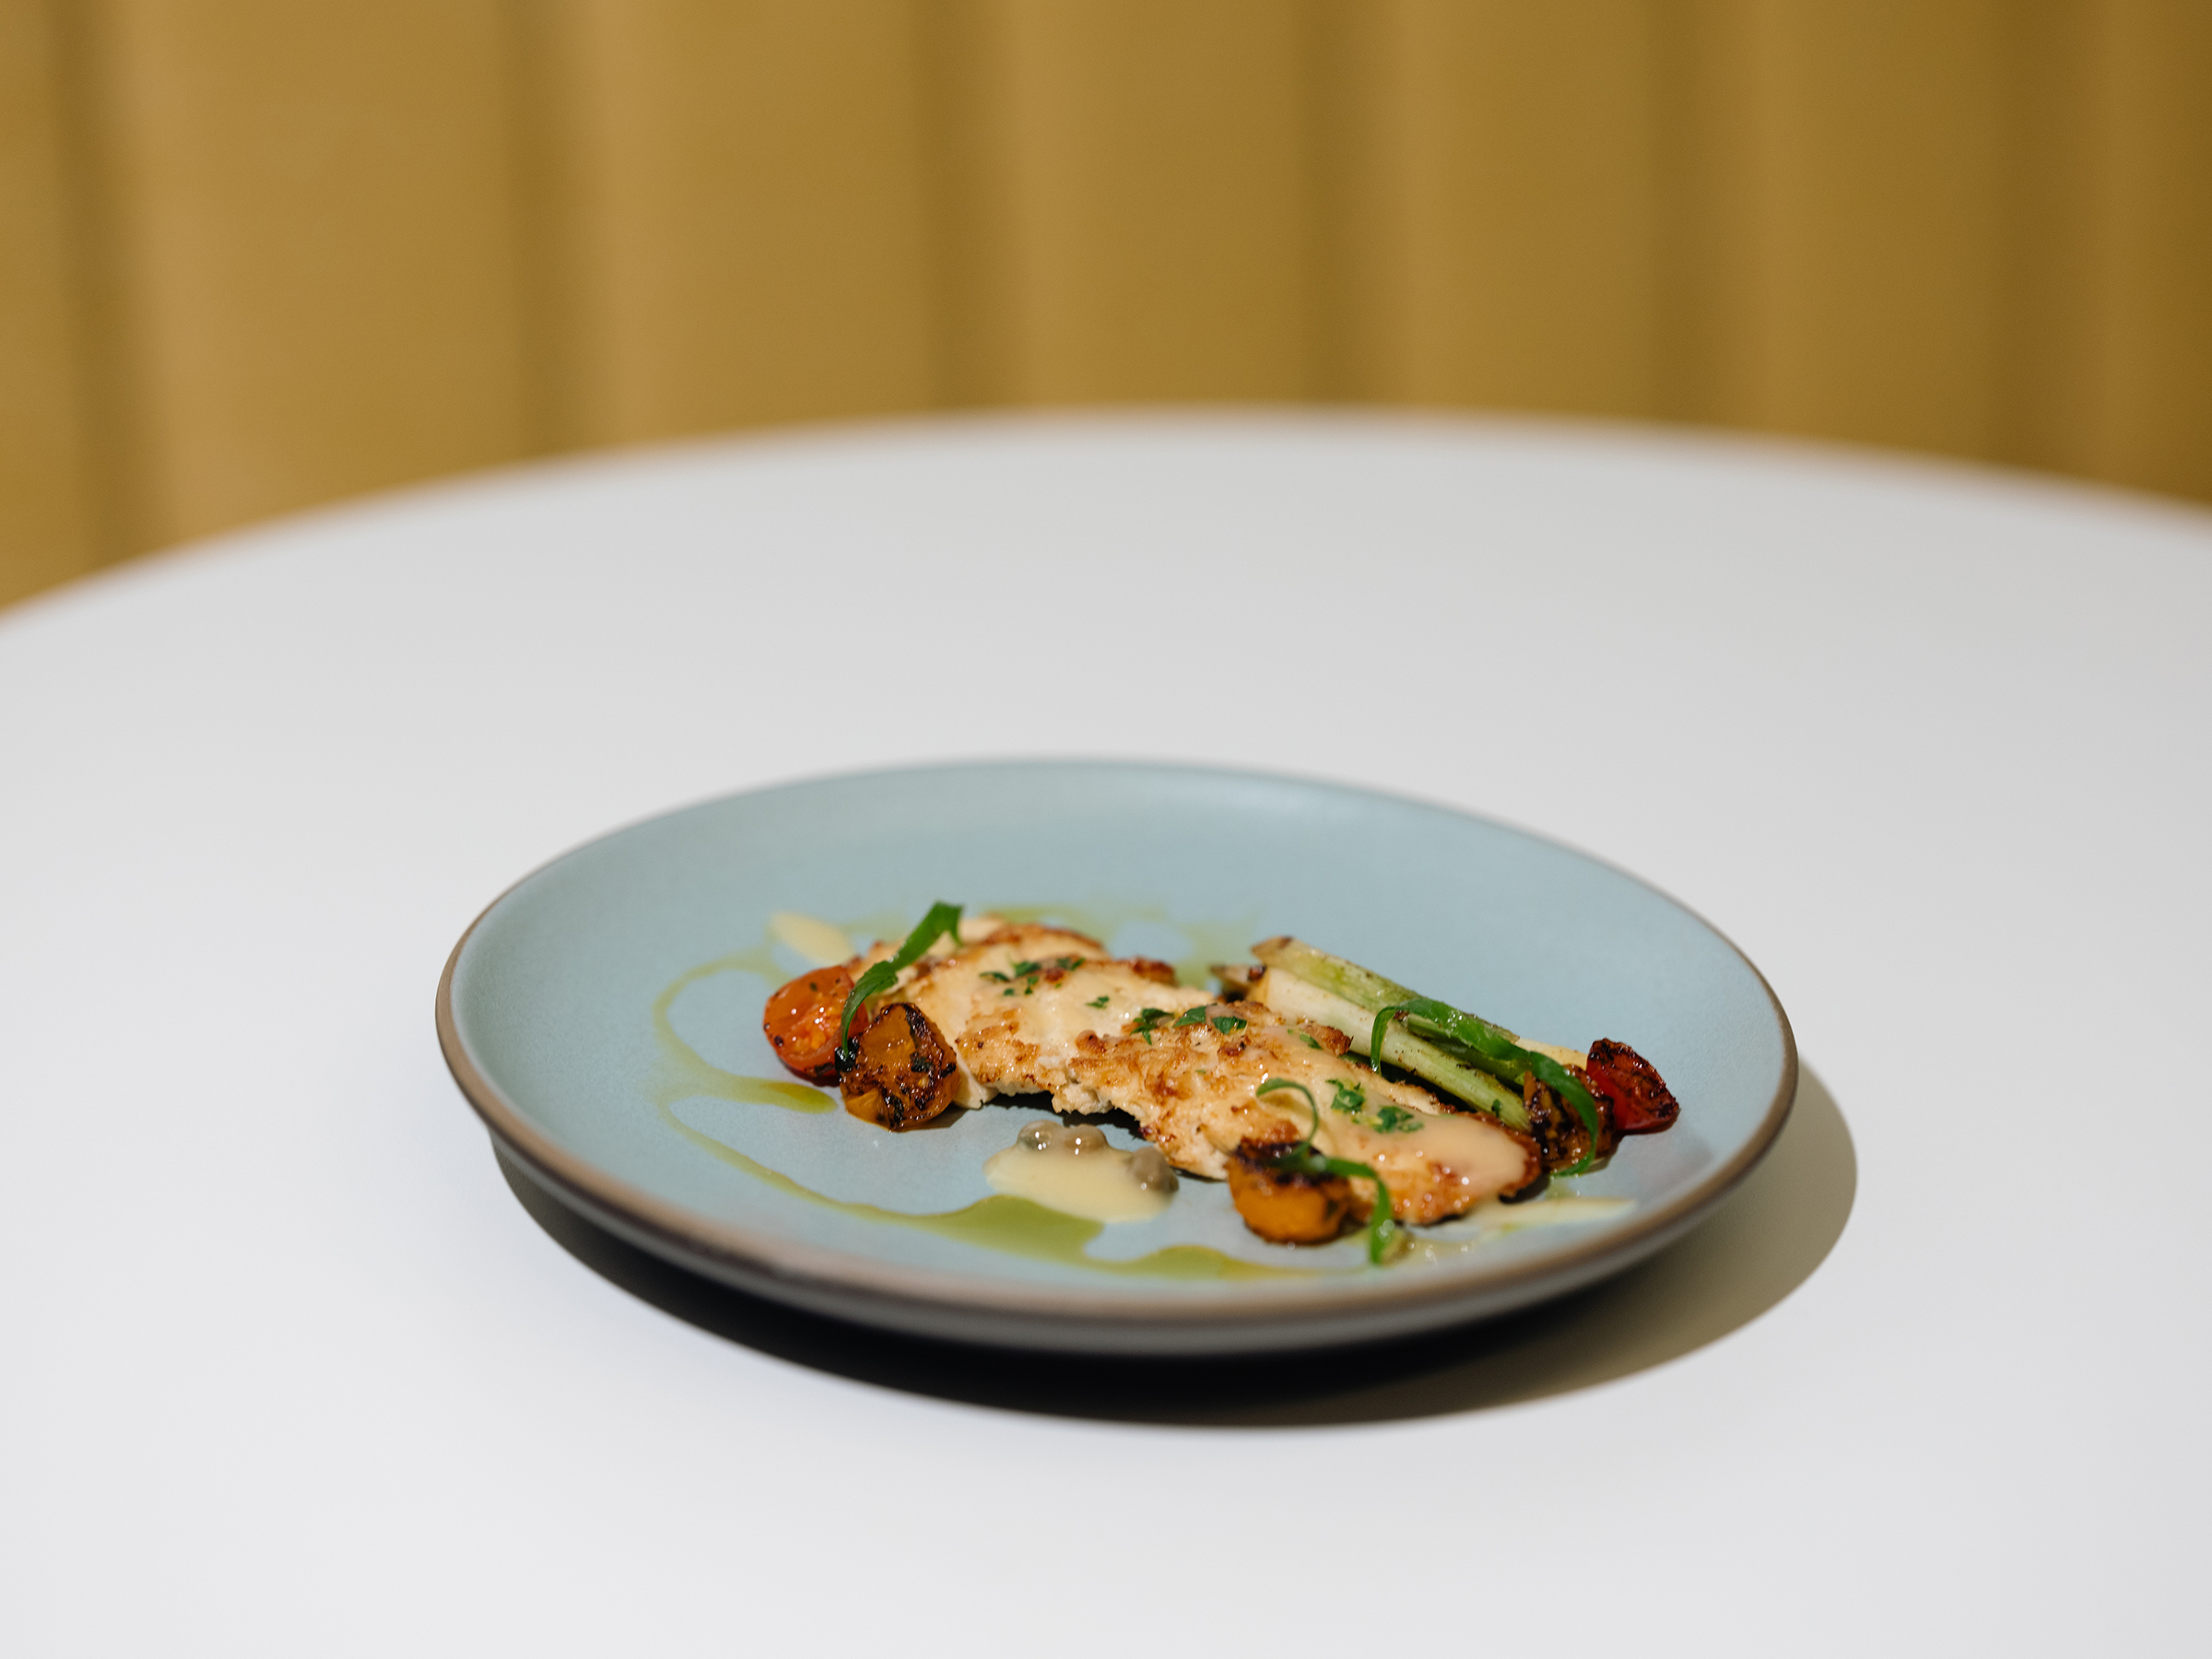 A dish made with Upside Foods' lab-grown chicken product (Rozette Rago for TIME)